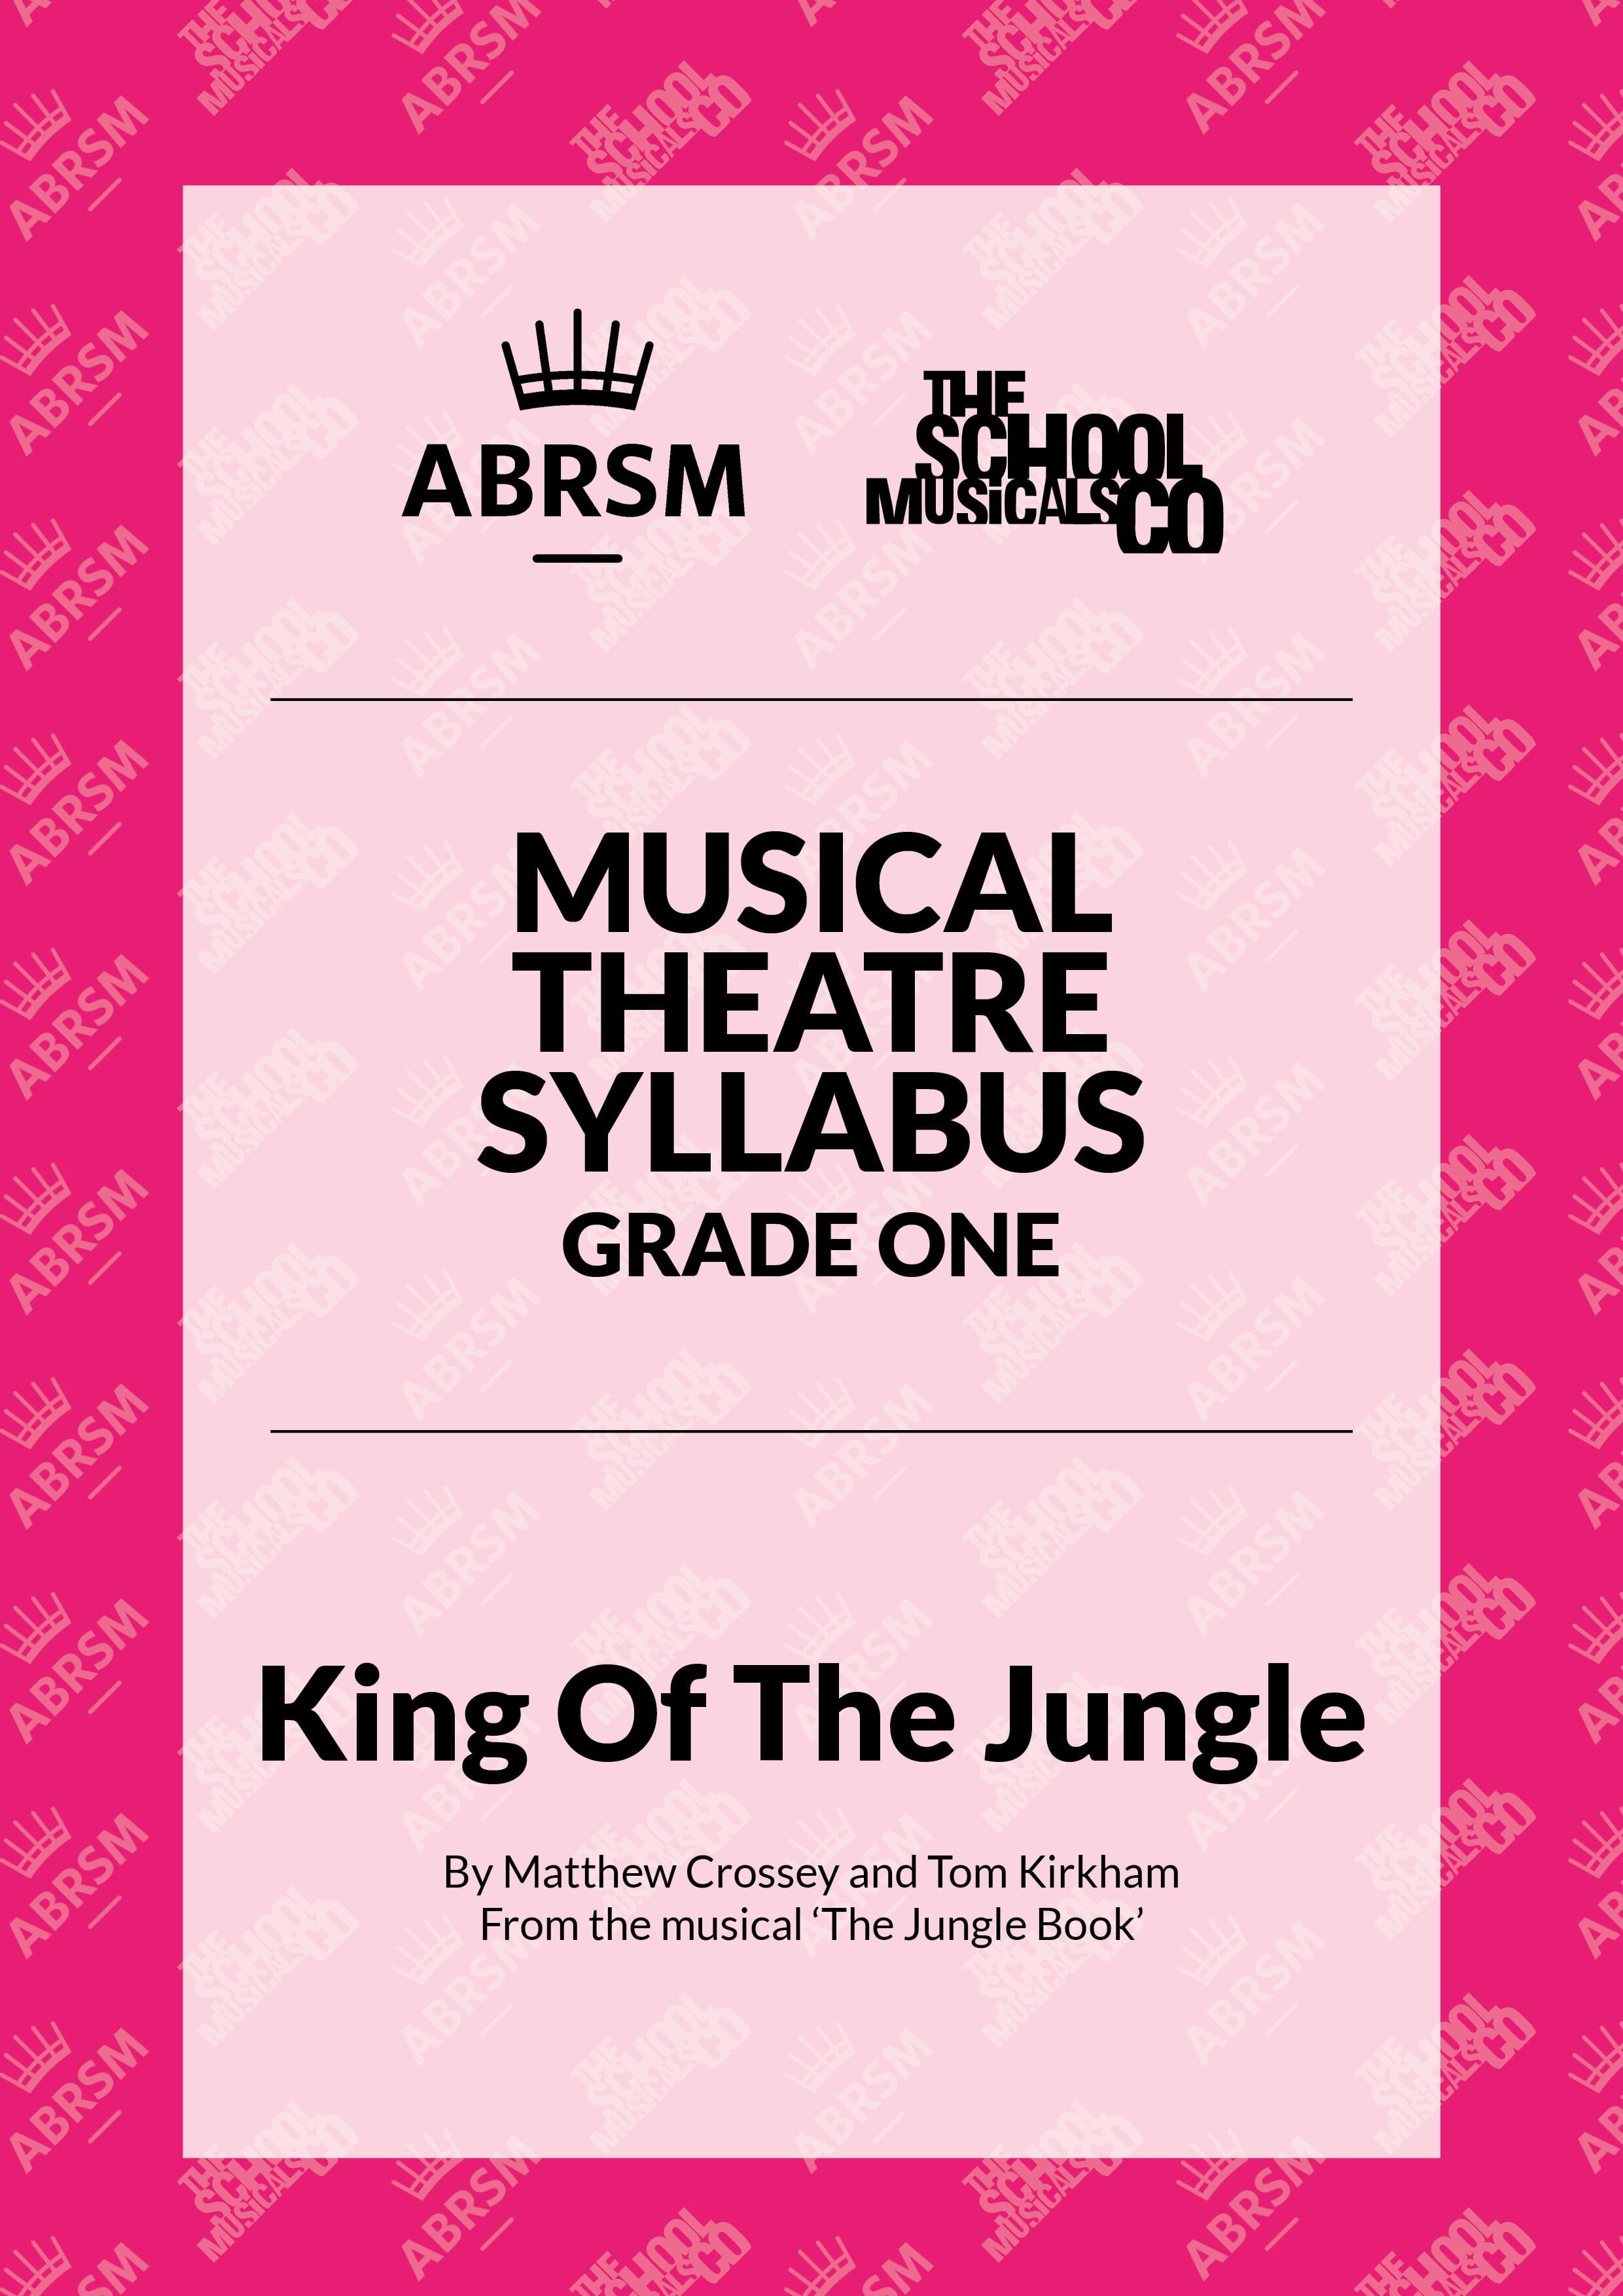 King Of The Jungle - ABRSM Musical Theatre Syllabus Grade One